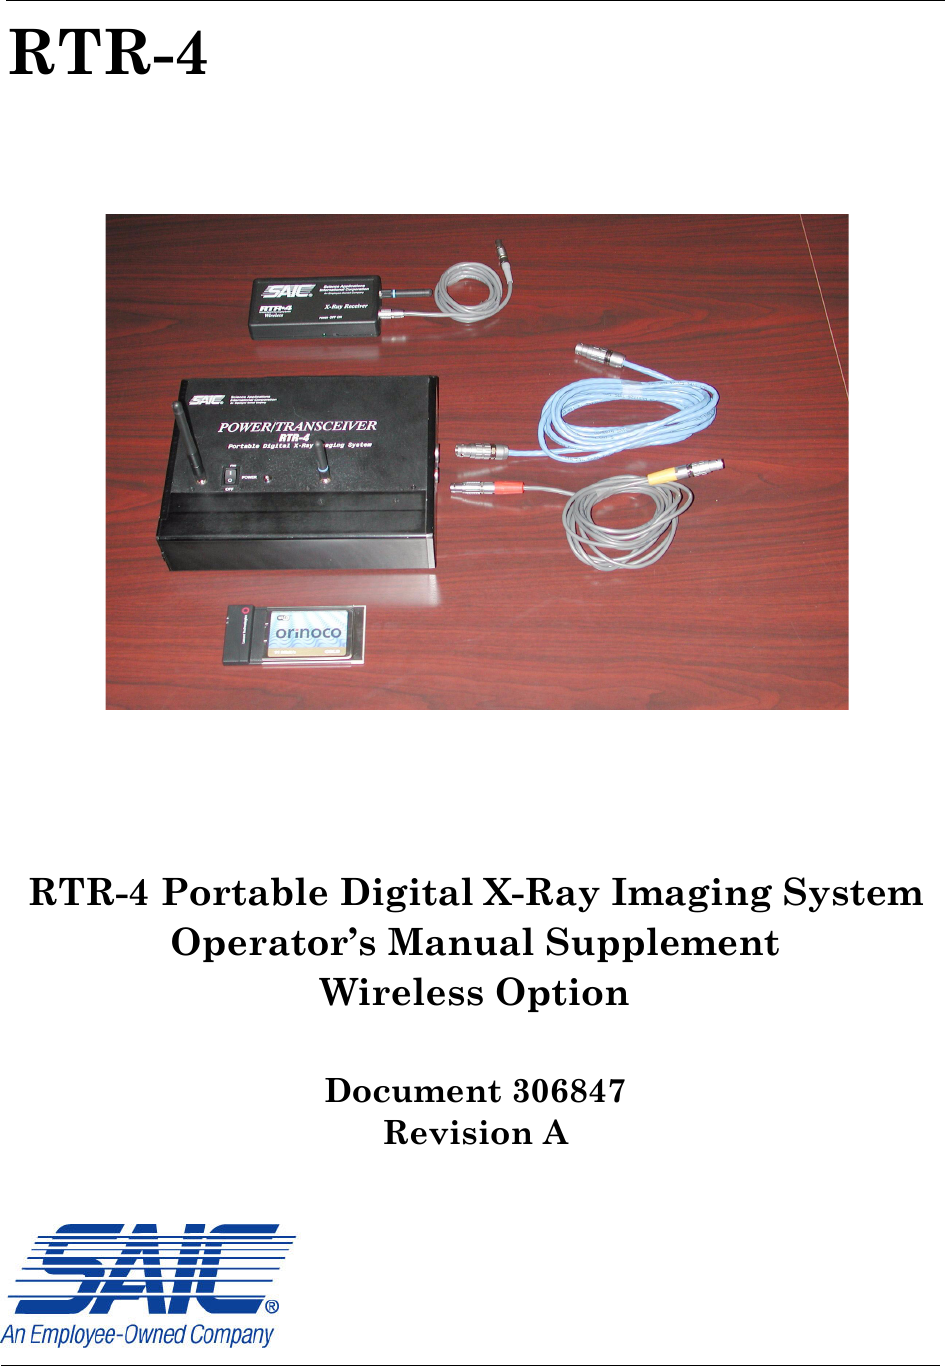 RTR-4 RTR-4 Portable Digital X-Ray Imaging System Operator’s Manual SupplementWireless OptionDocument 306847Revision A